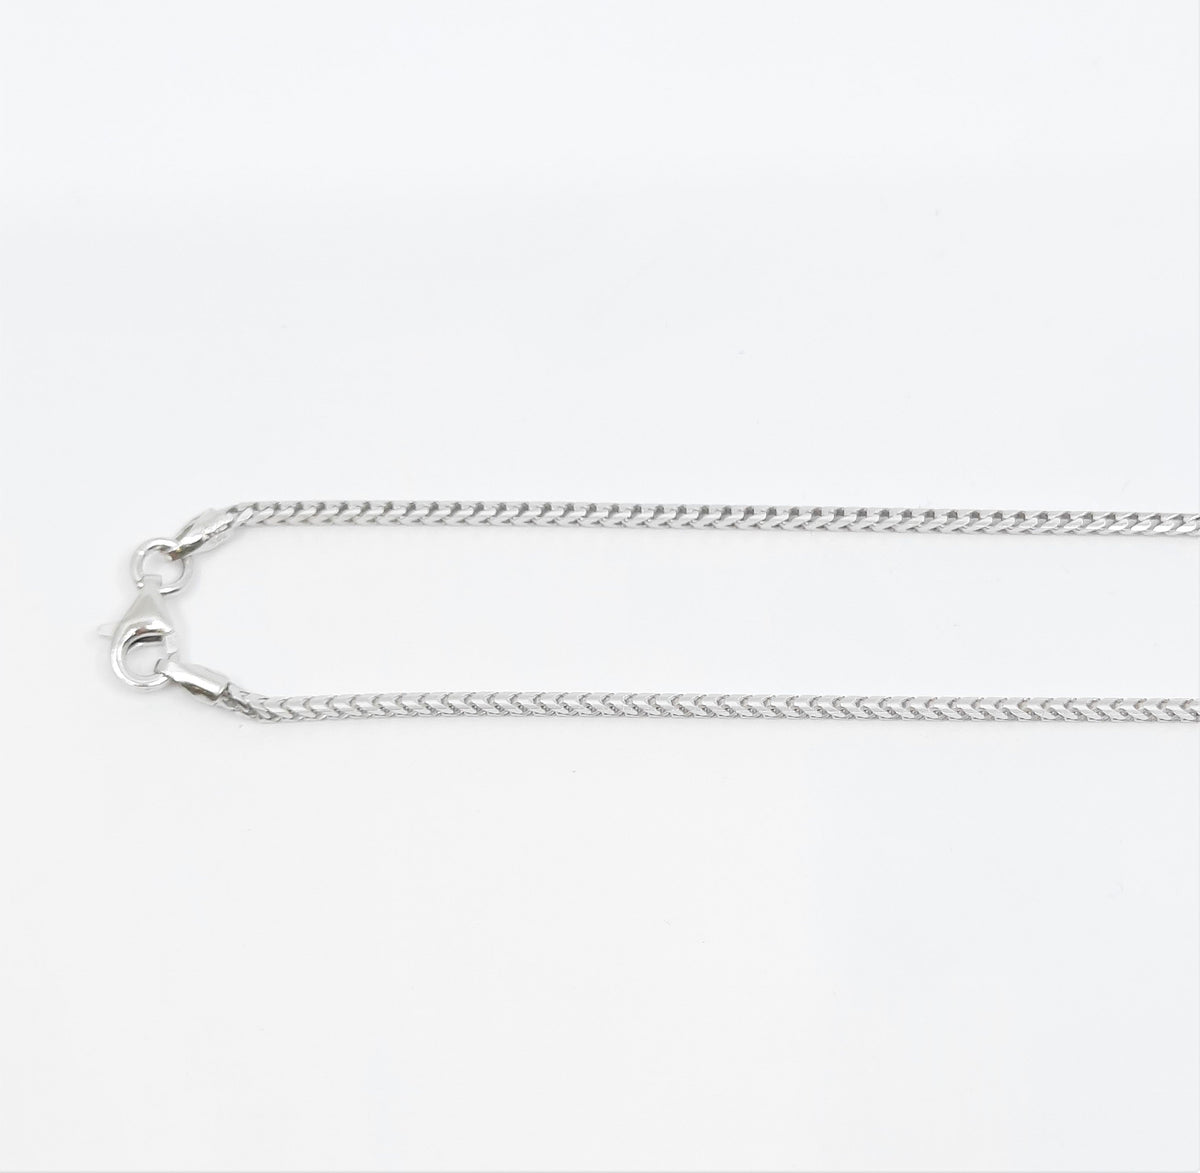 925 Sterling Silver 1.2mm Rhodium Plated Franco Chain with Lobster Clasp - 16 Inches